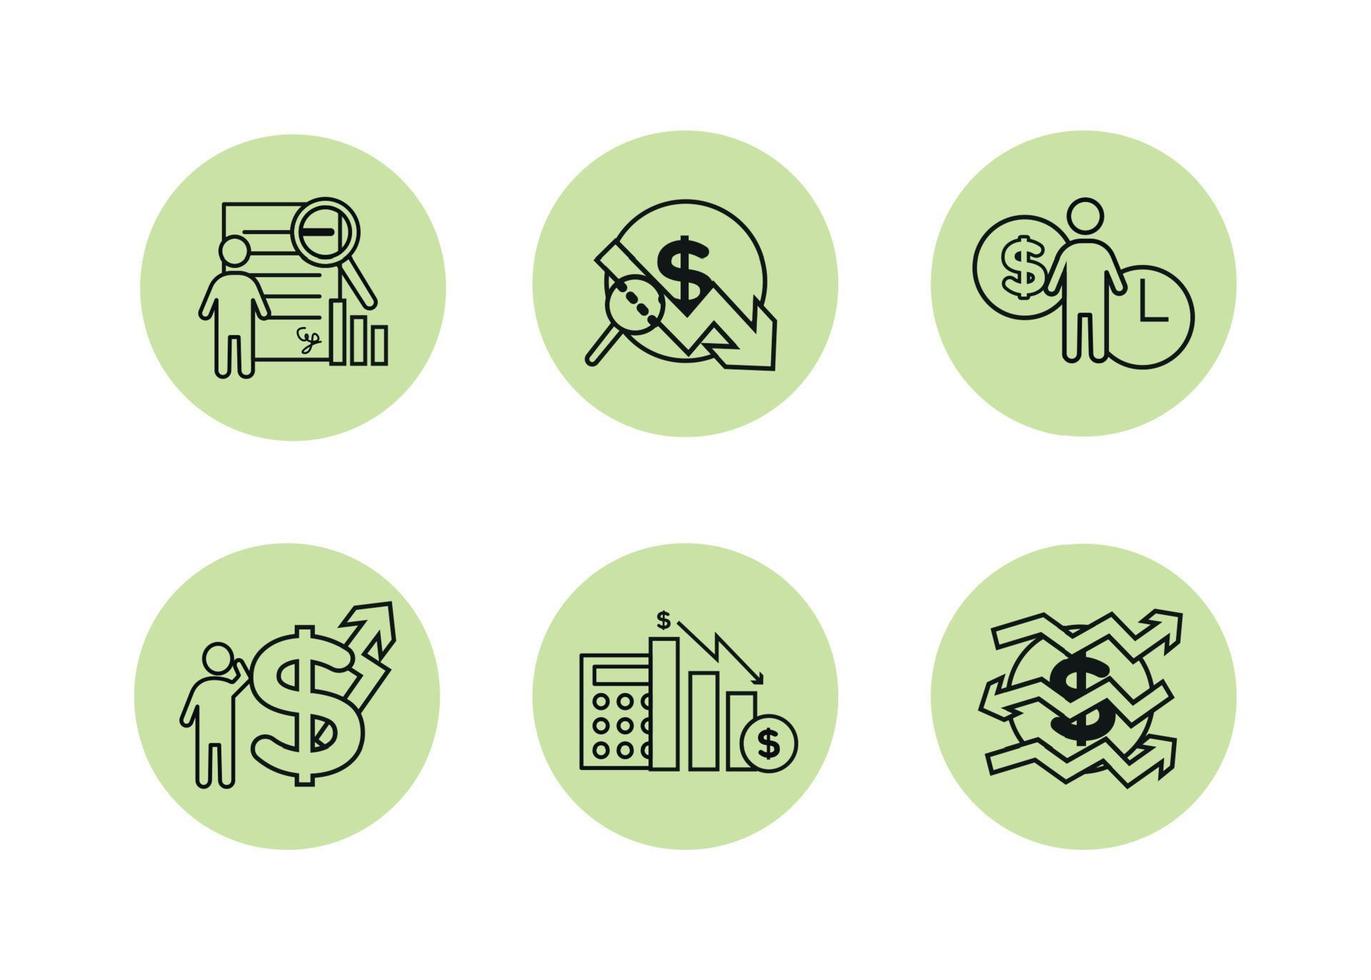 Finance icons set. Vector illustration of financial management, econometrics. A dollar sign, next to which is the silhouette of a man, followed by an up arrow.